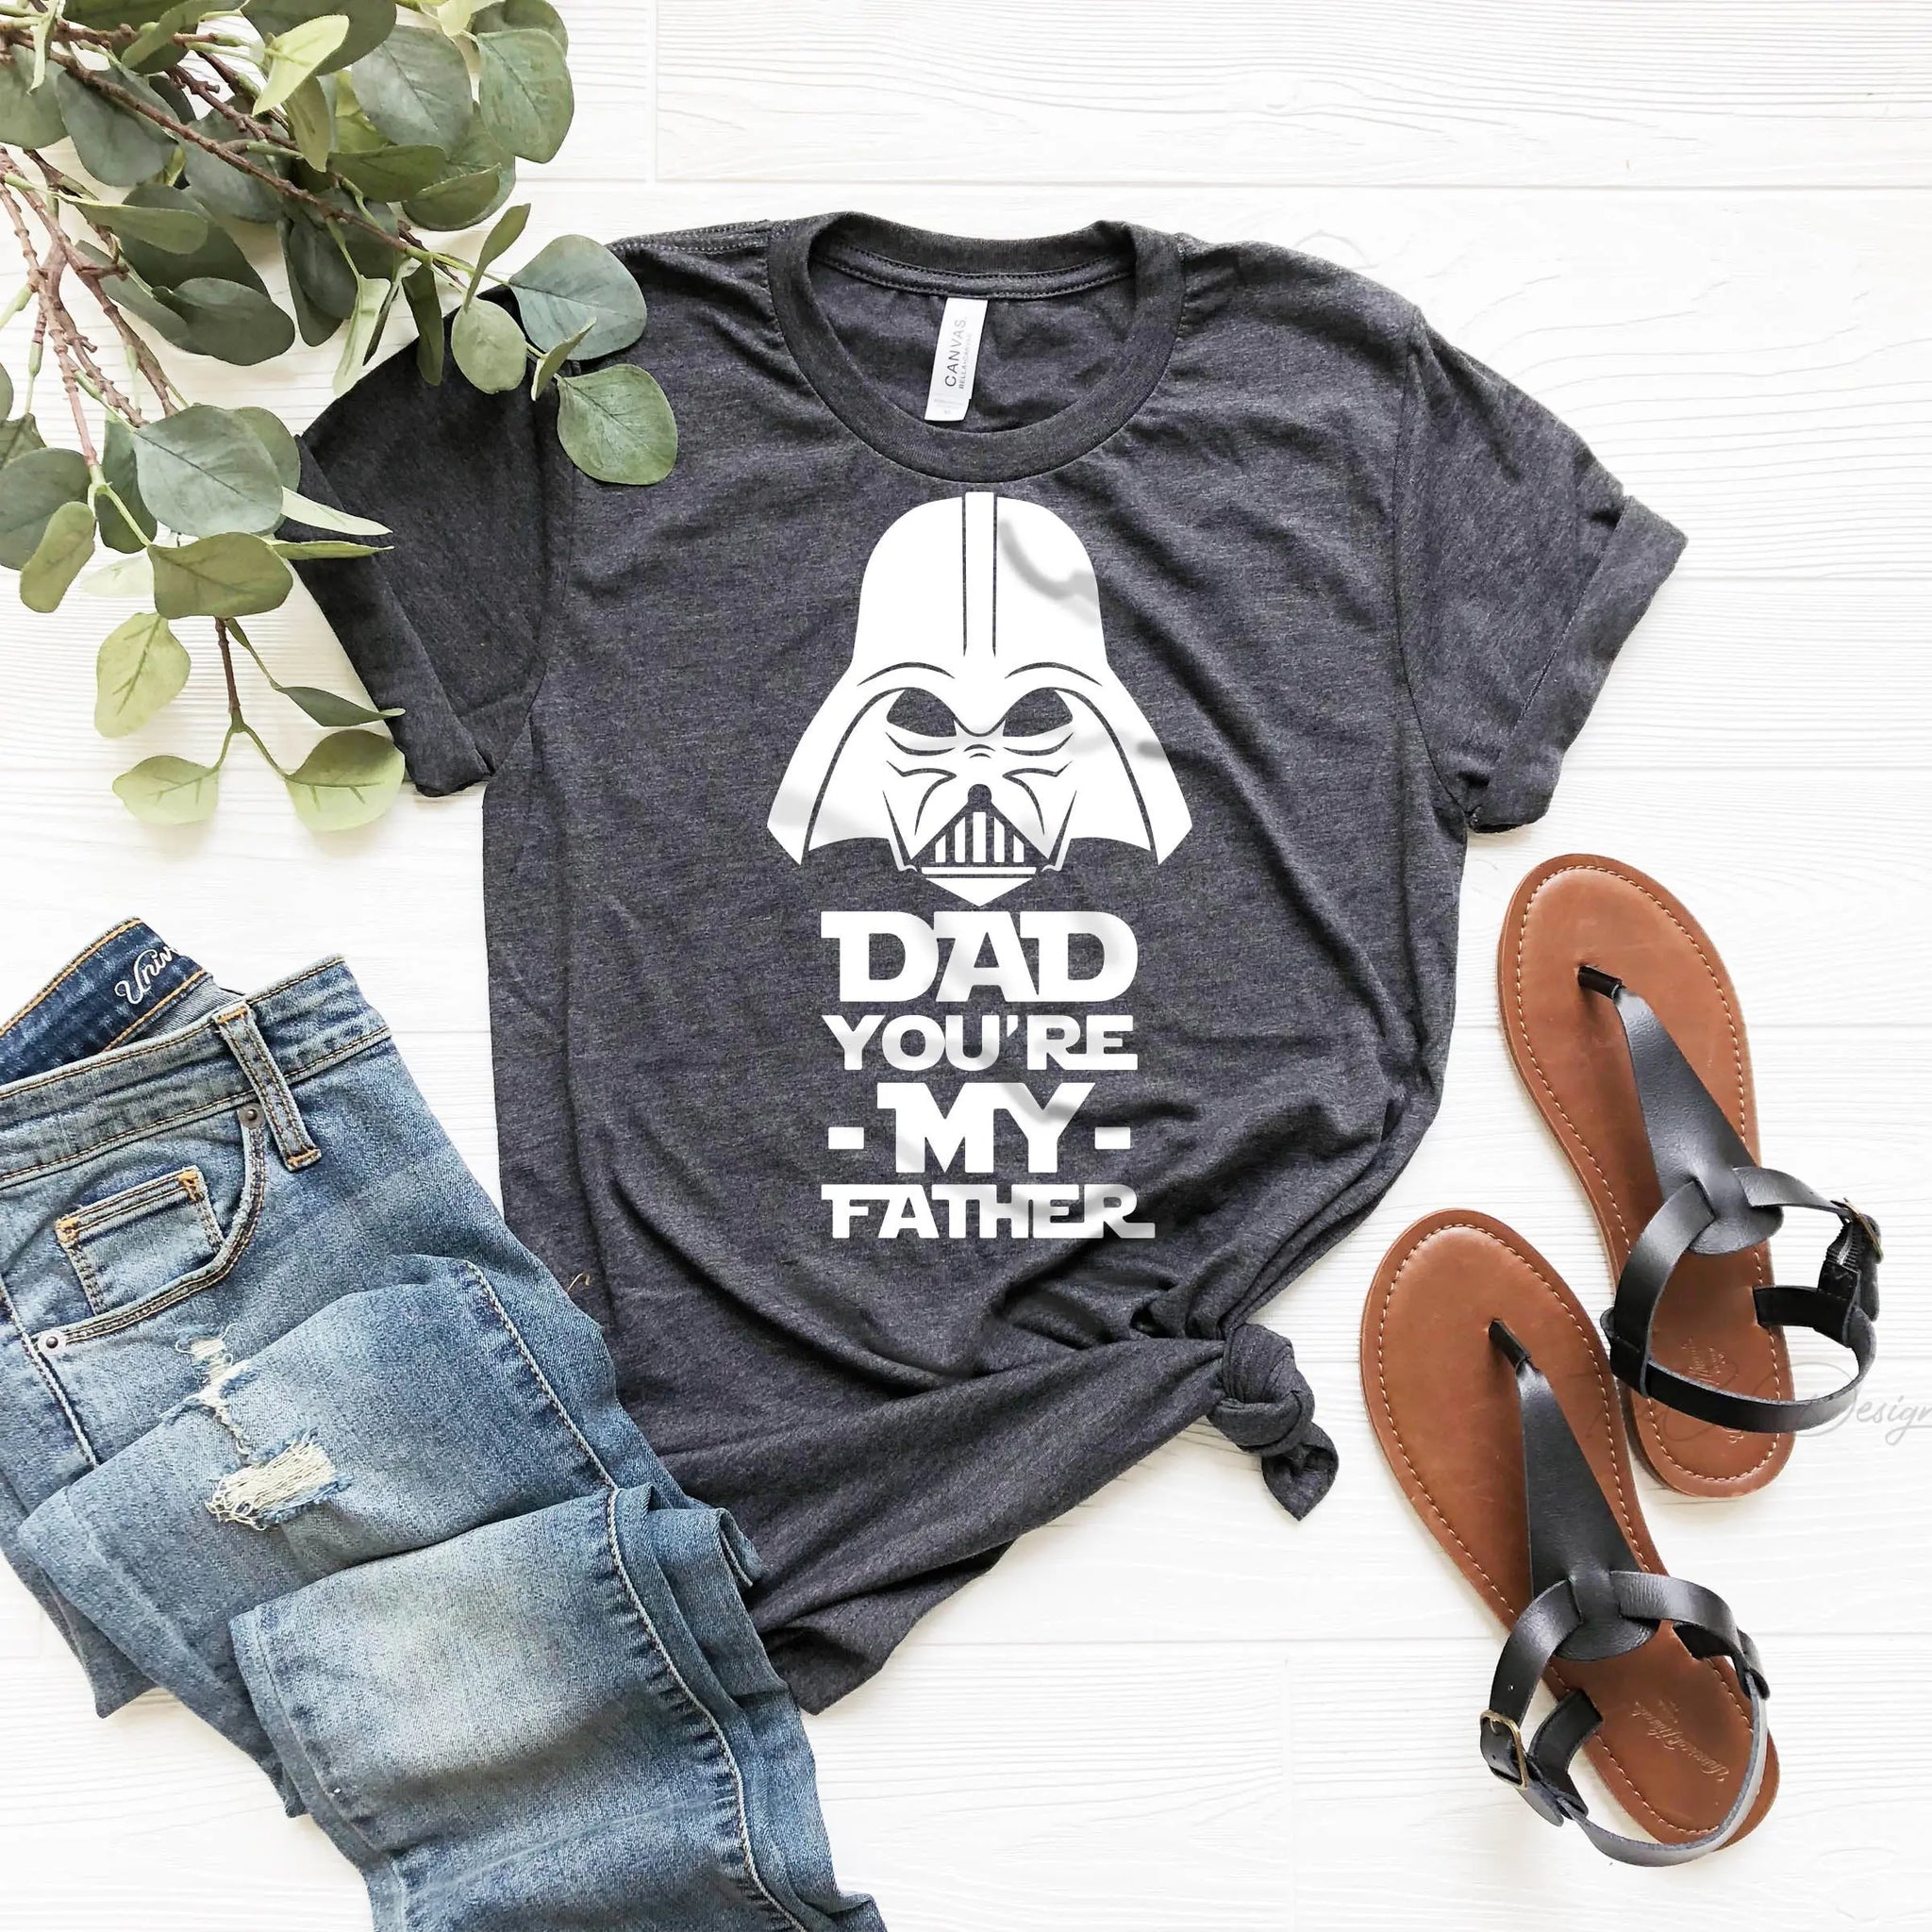 Funny Dad Tshirts for Fathers Day, Dad gift shirts, Dad shirts from daughter, Star wars Funny Shirts, for dad men husband,Dad Birthday, - Fastdeliverytees.com